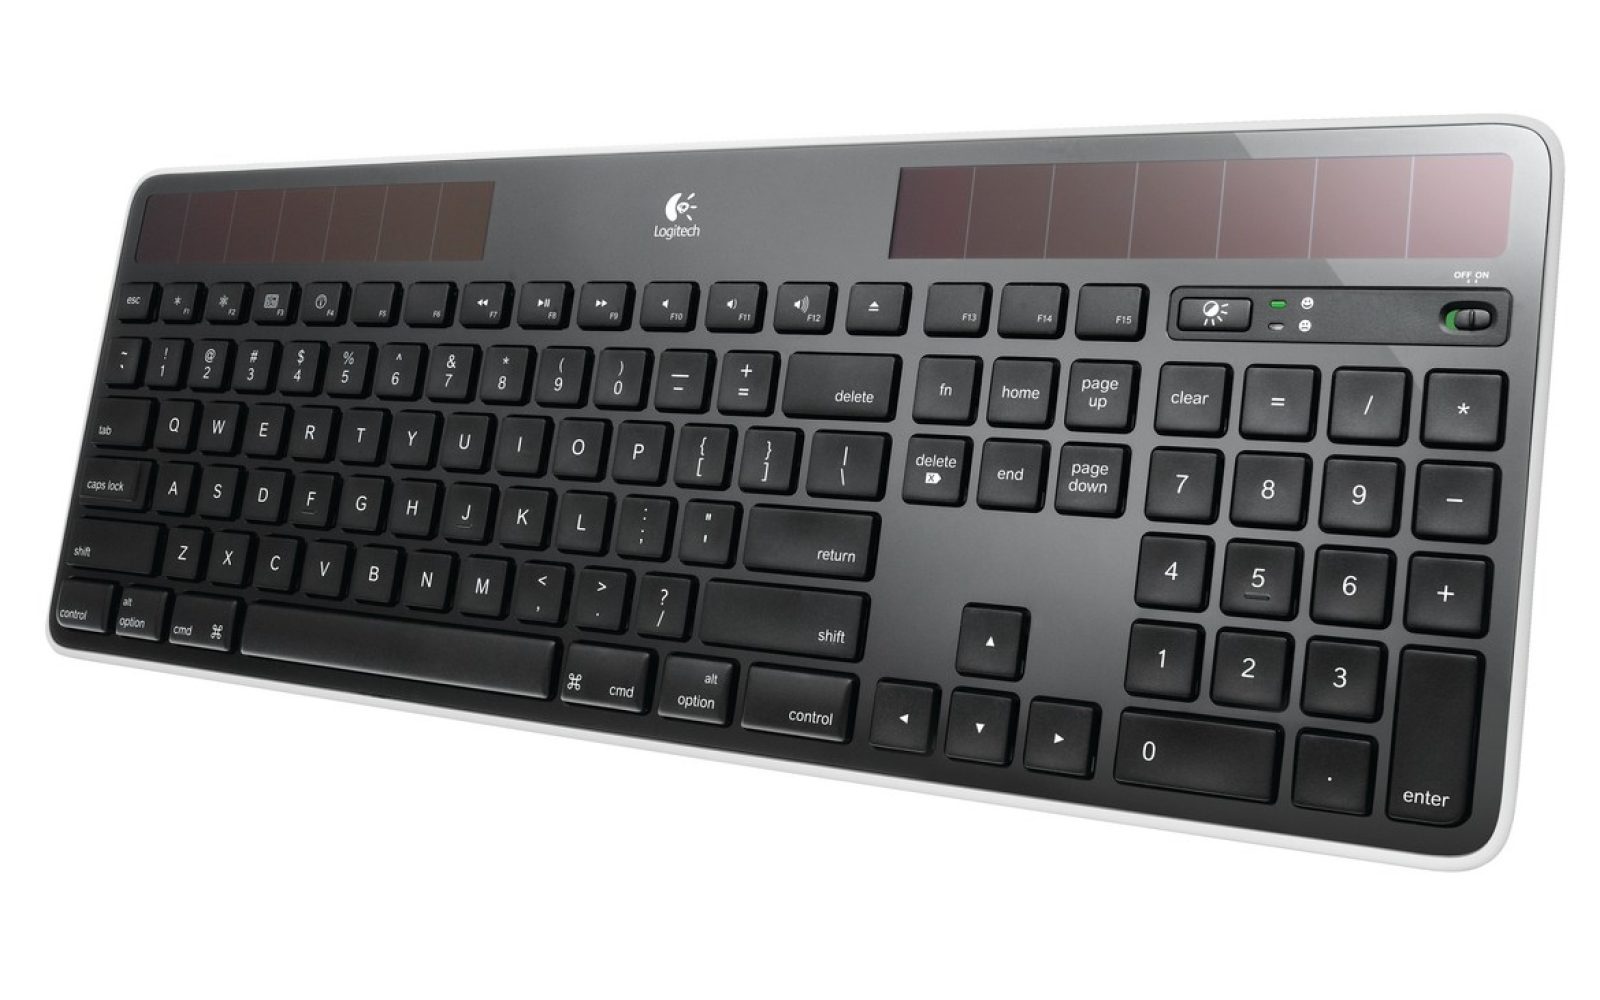 logitech setpoint mouse and keyboard software